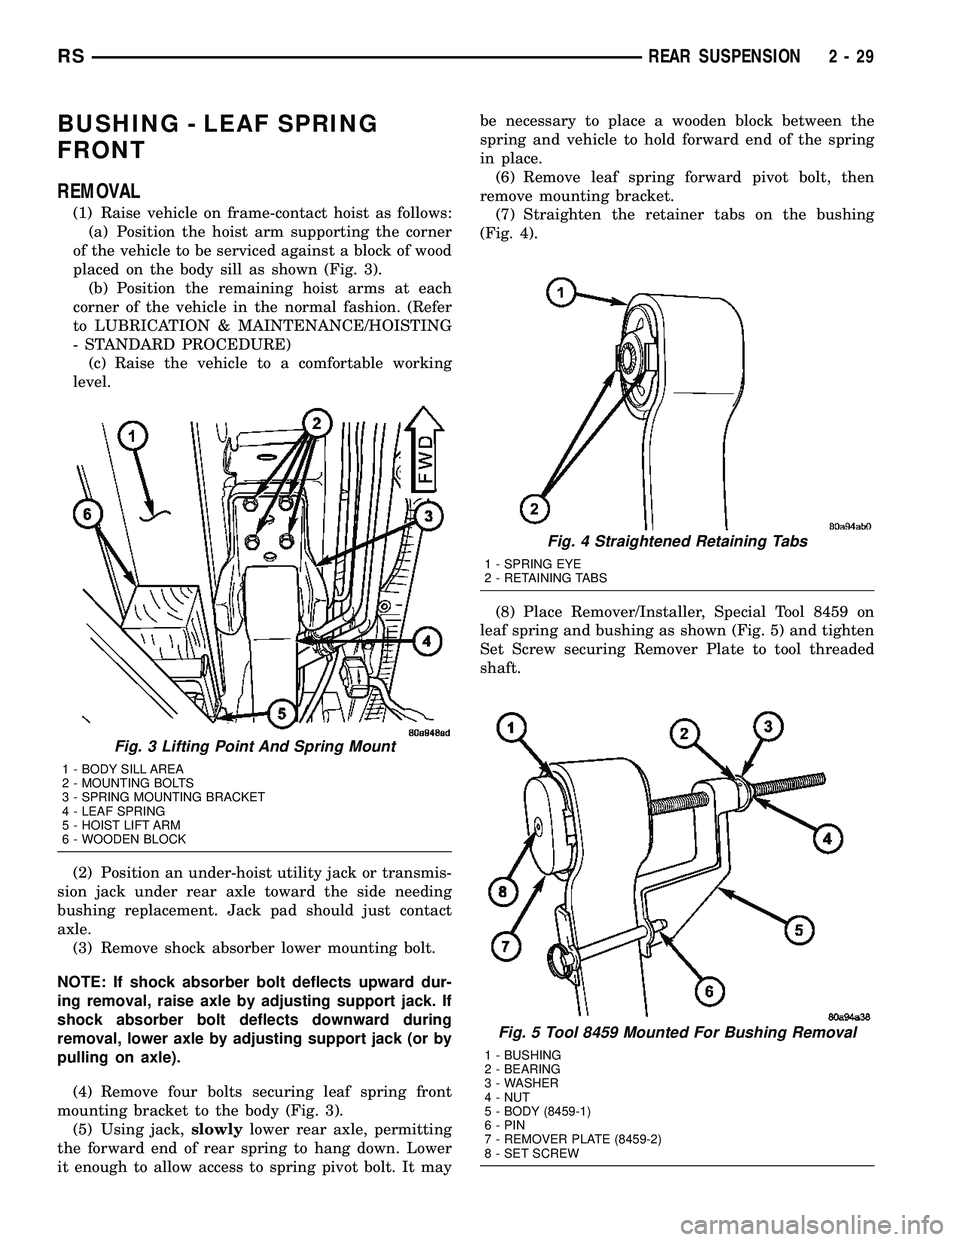 CHRYSLER VOYAGER 2005  Service Manual BUSHING - LEAF SPRING
FRONT
REMOVAL
(1) Raise vehicle on frame-contact hoist as follows:
(a) Position the hoist arm supporting the corner
of the vehicle to be serviced against a block of wood
placed o